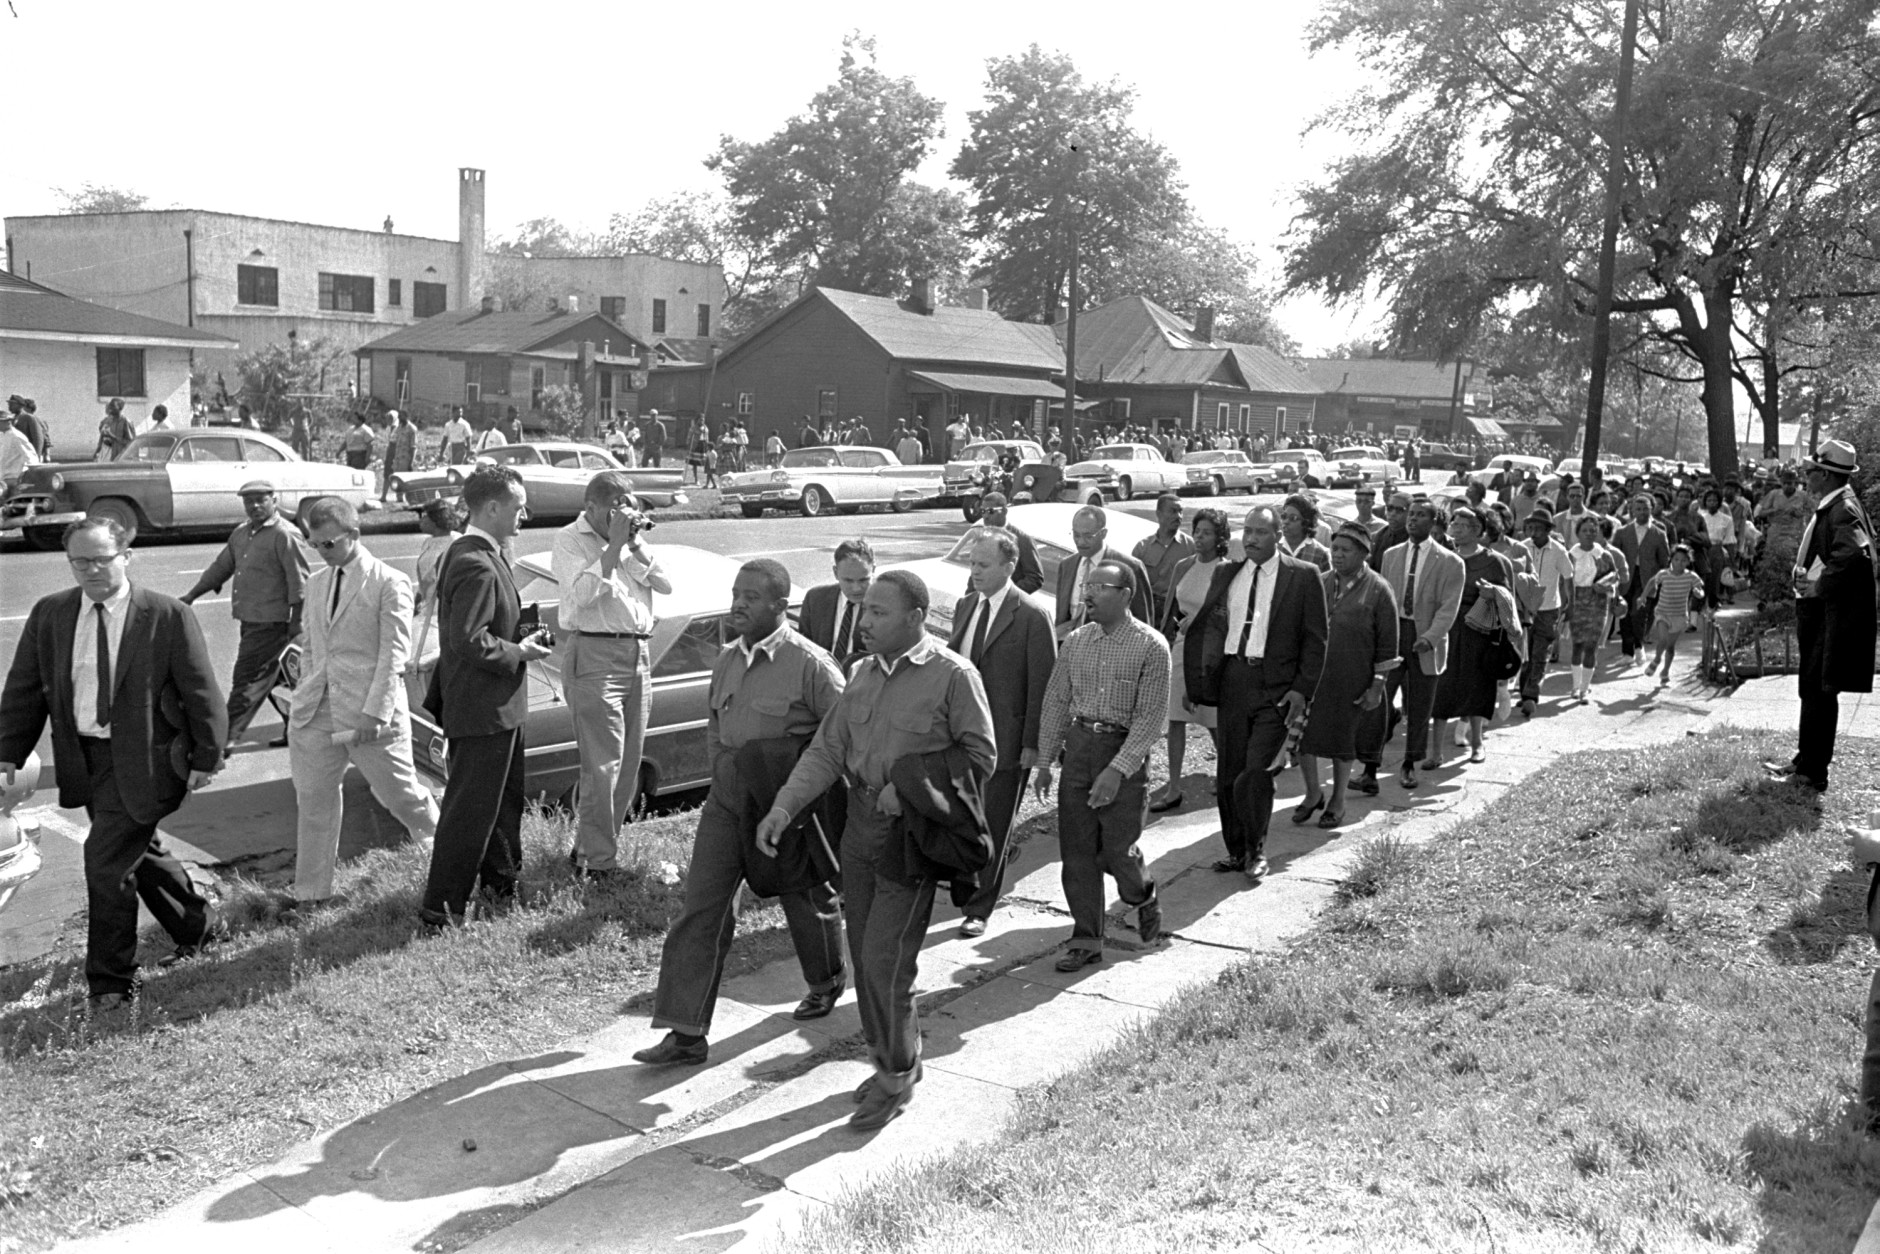 Rev. Ralph Abernathy, left, and Rev. Martin Luther King Jr. lead a column of demonstrators as they attempt to march on Birmingham, Ala., city hall April 12, 1963.  Police intercepted the group short of their goal. (AP Photo/Horace Cort)